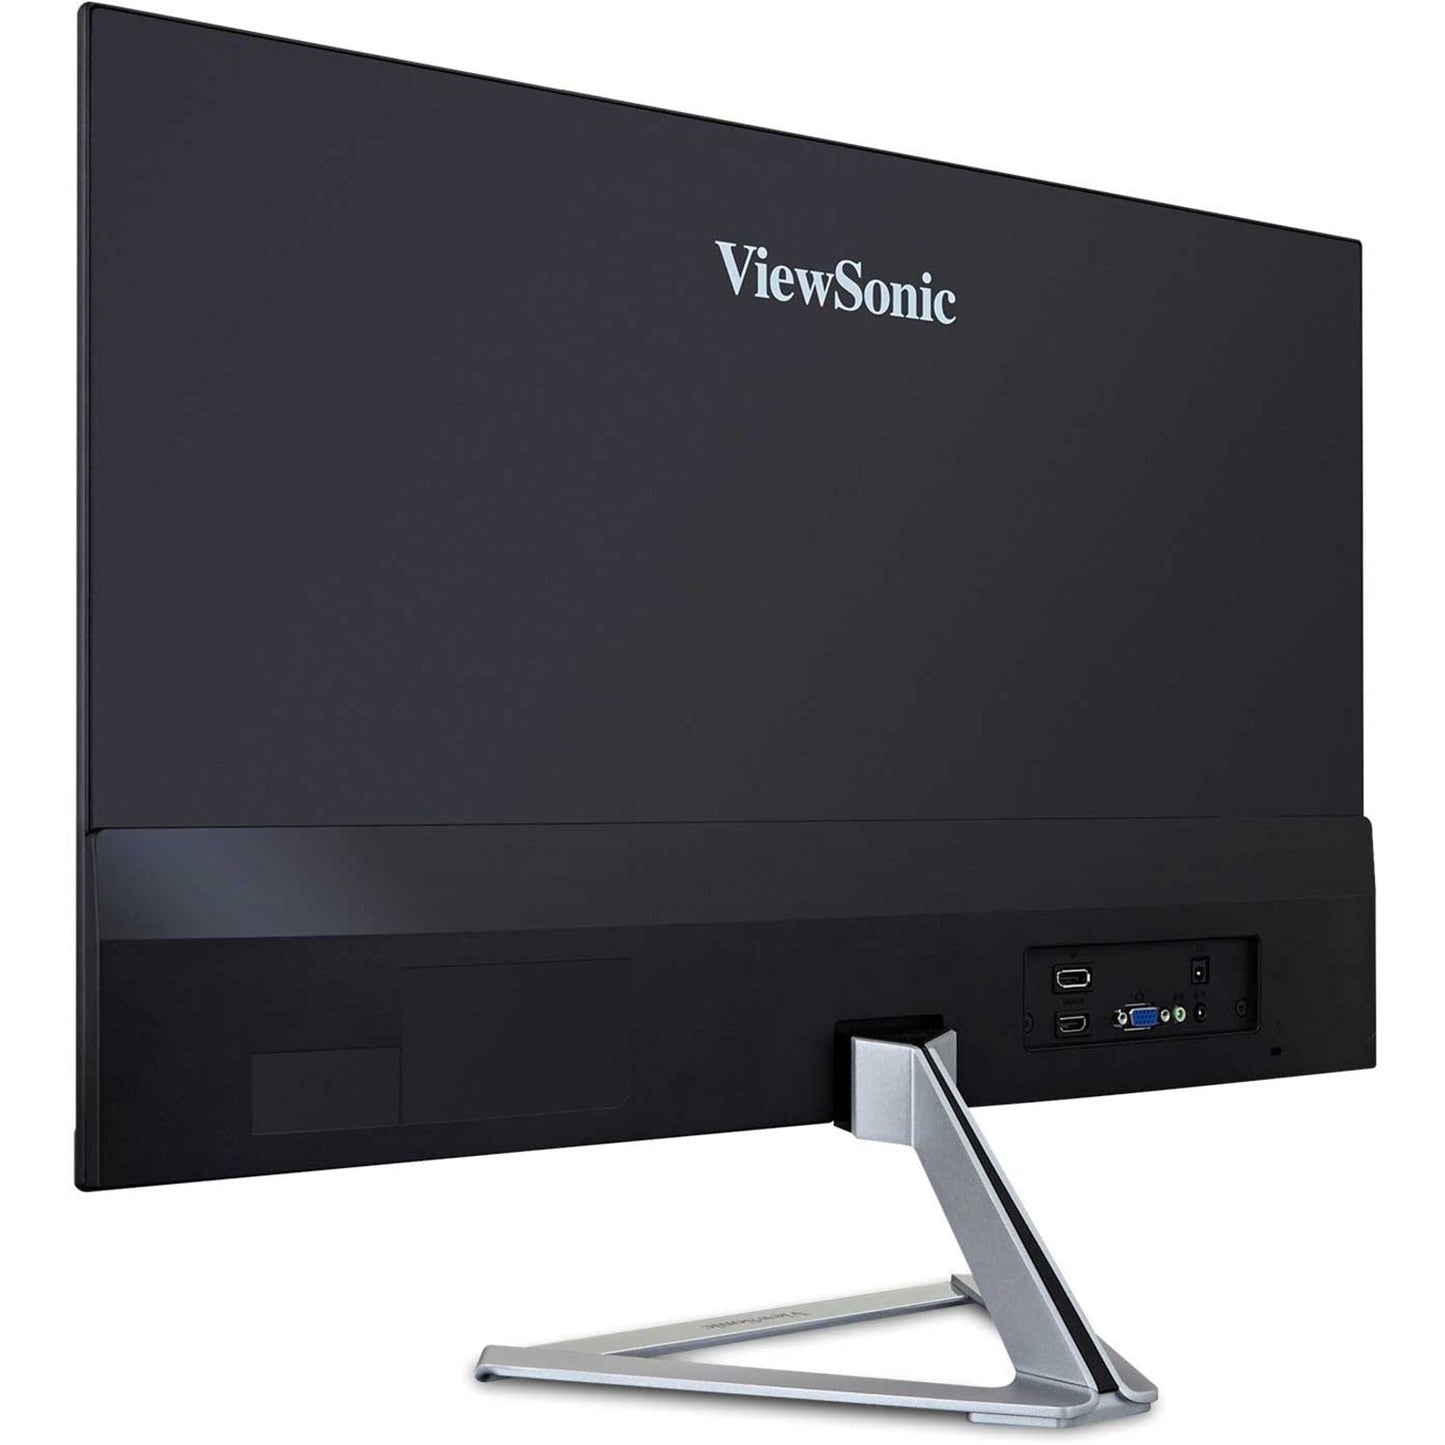 ViewSonic VX2476-SMHD 24 Inch 1080p Widescreen IPS Monitor with Ultra-Thin Bezels HDMI and DisplayPort